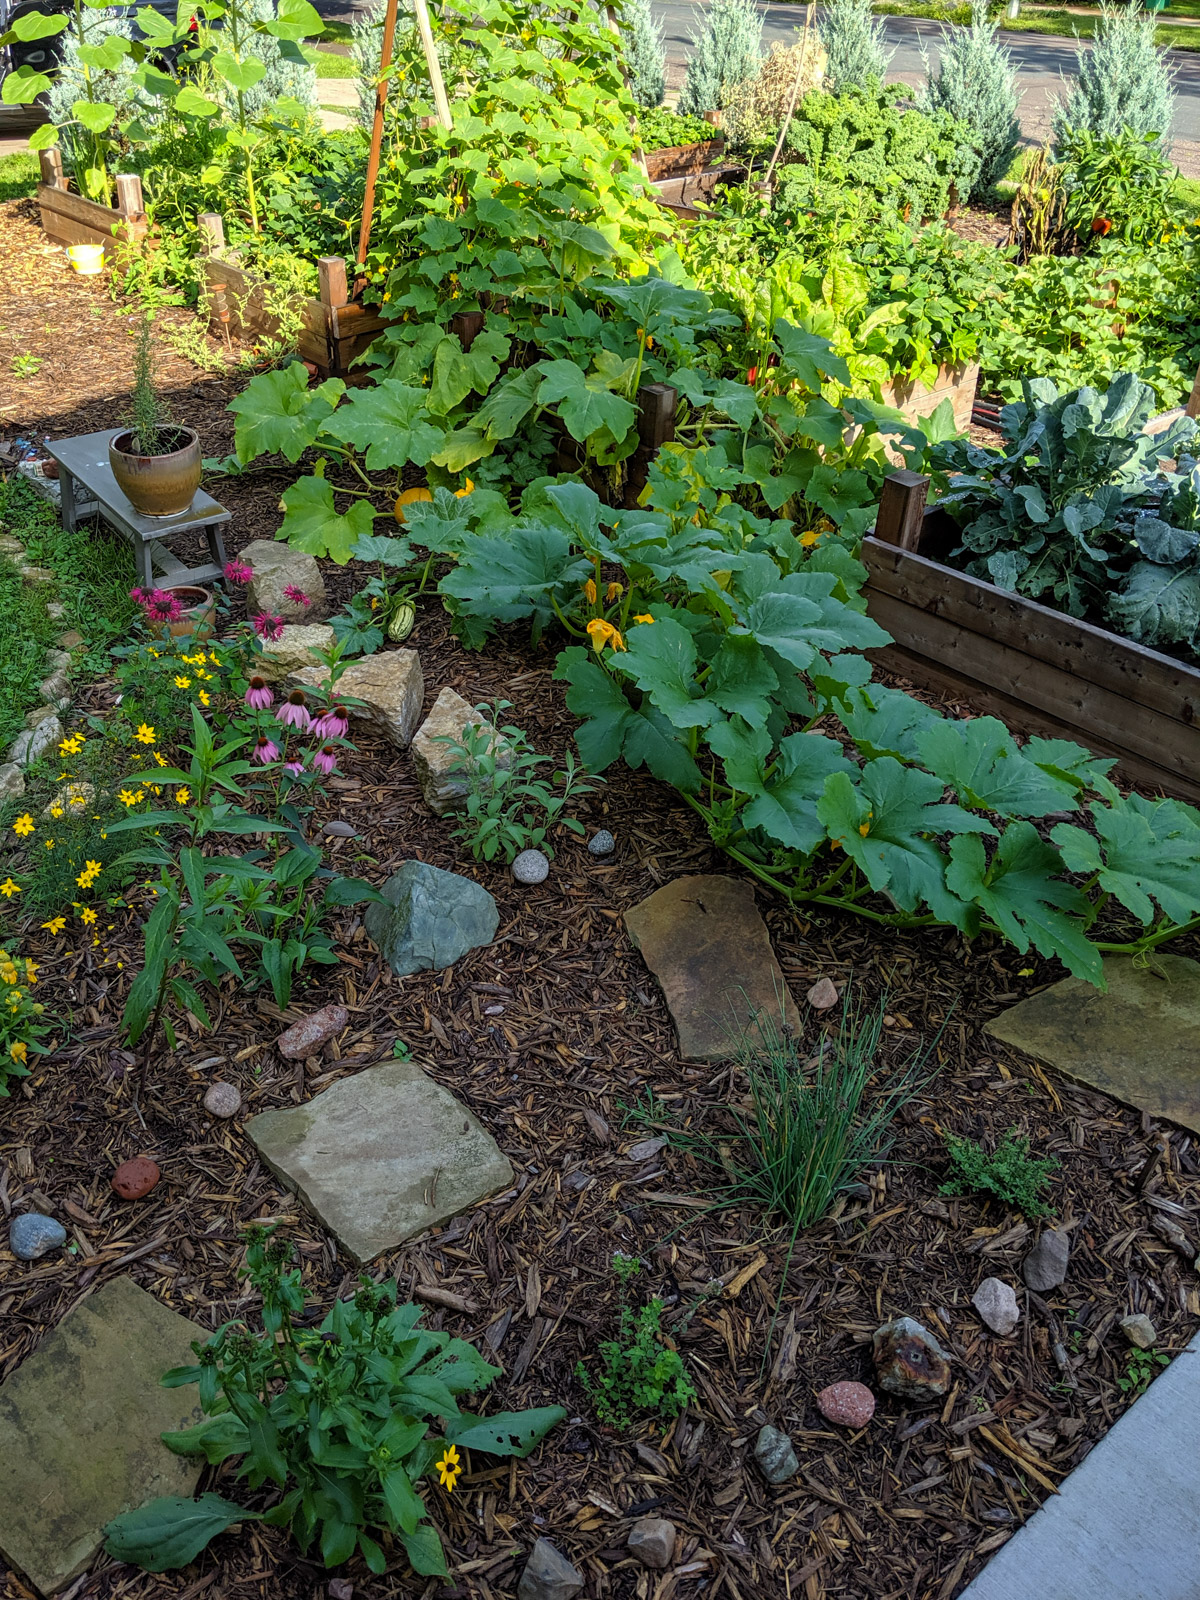 Raised bed gardens with vining pumpkins and flowers.